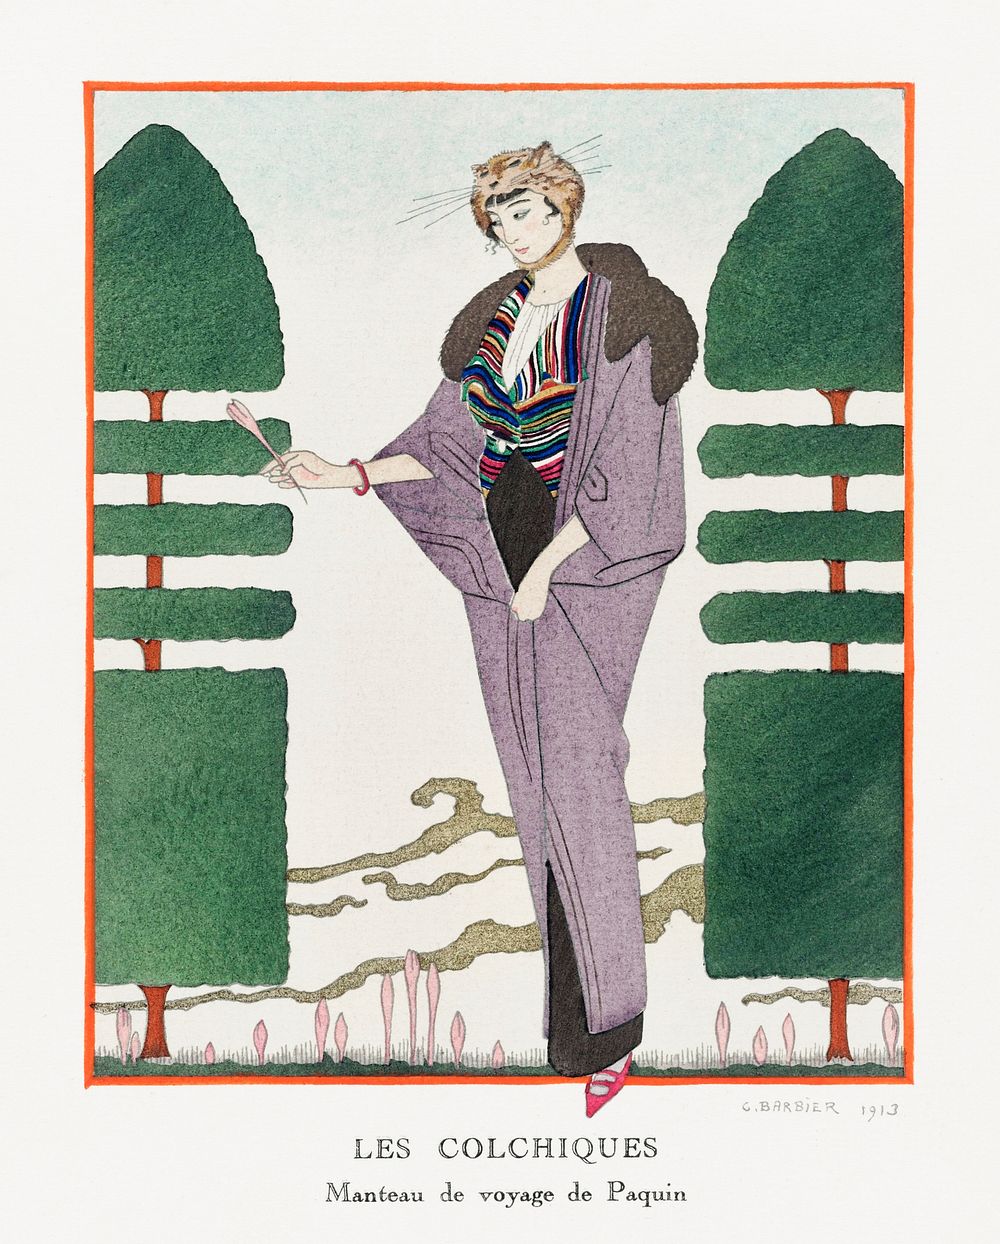 Les Colchiques (1914) fashion illustration in high resolution by George Barbier. Original from The Rijksmuseum. Digitally…